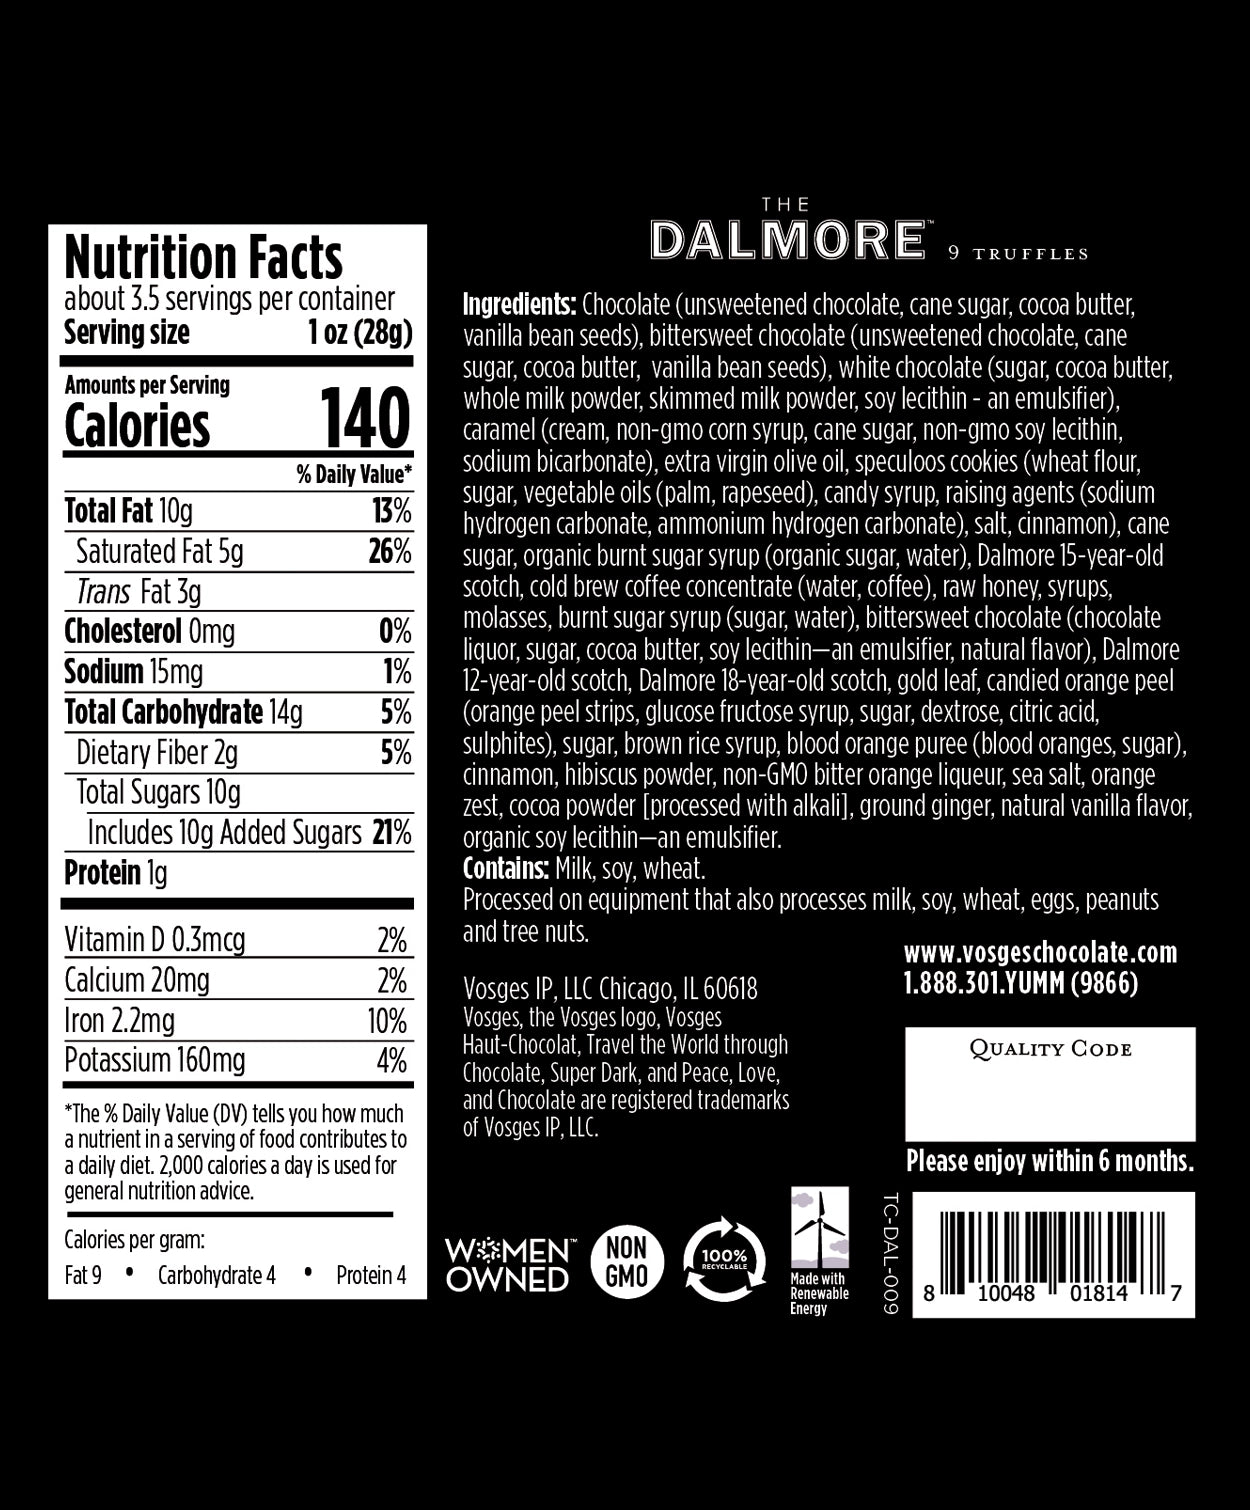 Nutrition Facts and Ingredients of Vosges Haut-Chocolat Dalmore truffle collection in white, san-serif font on a deep purple background.